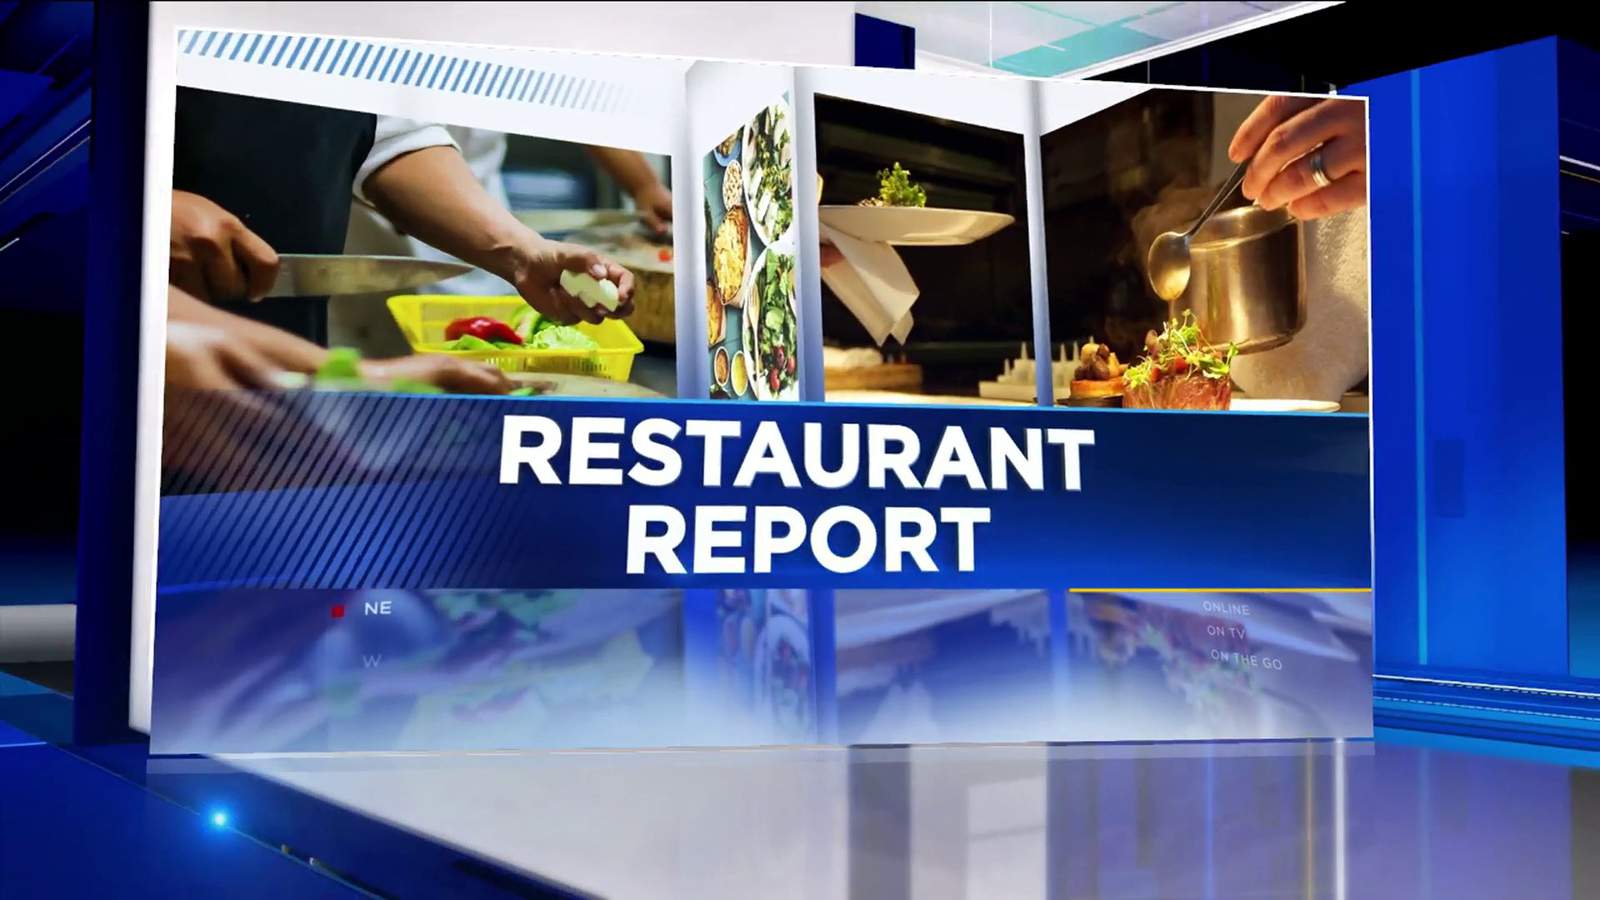 Jacksonville bistro temporarily shut down after inspectors find rodent droppings